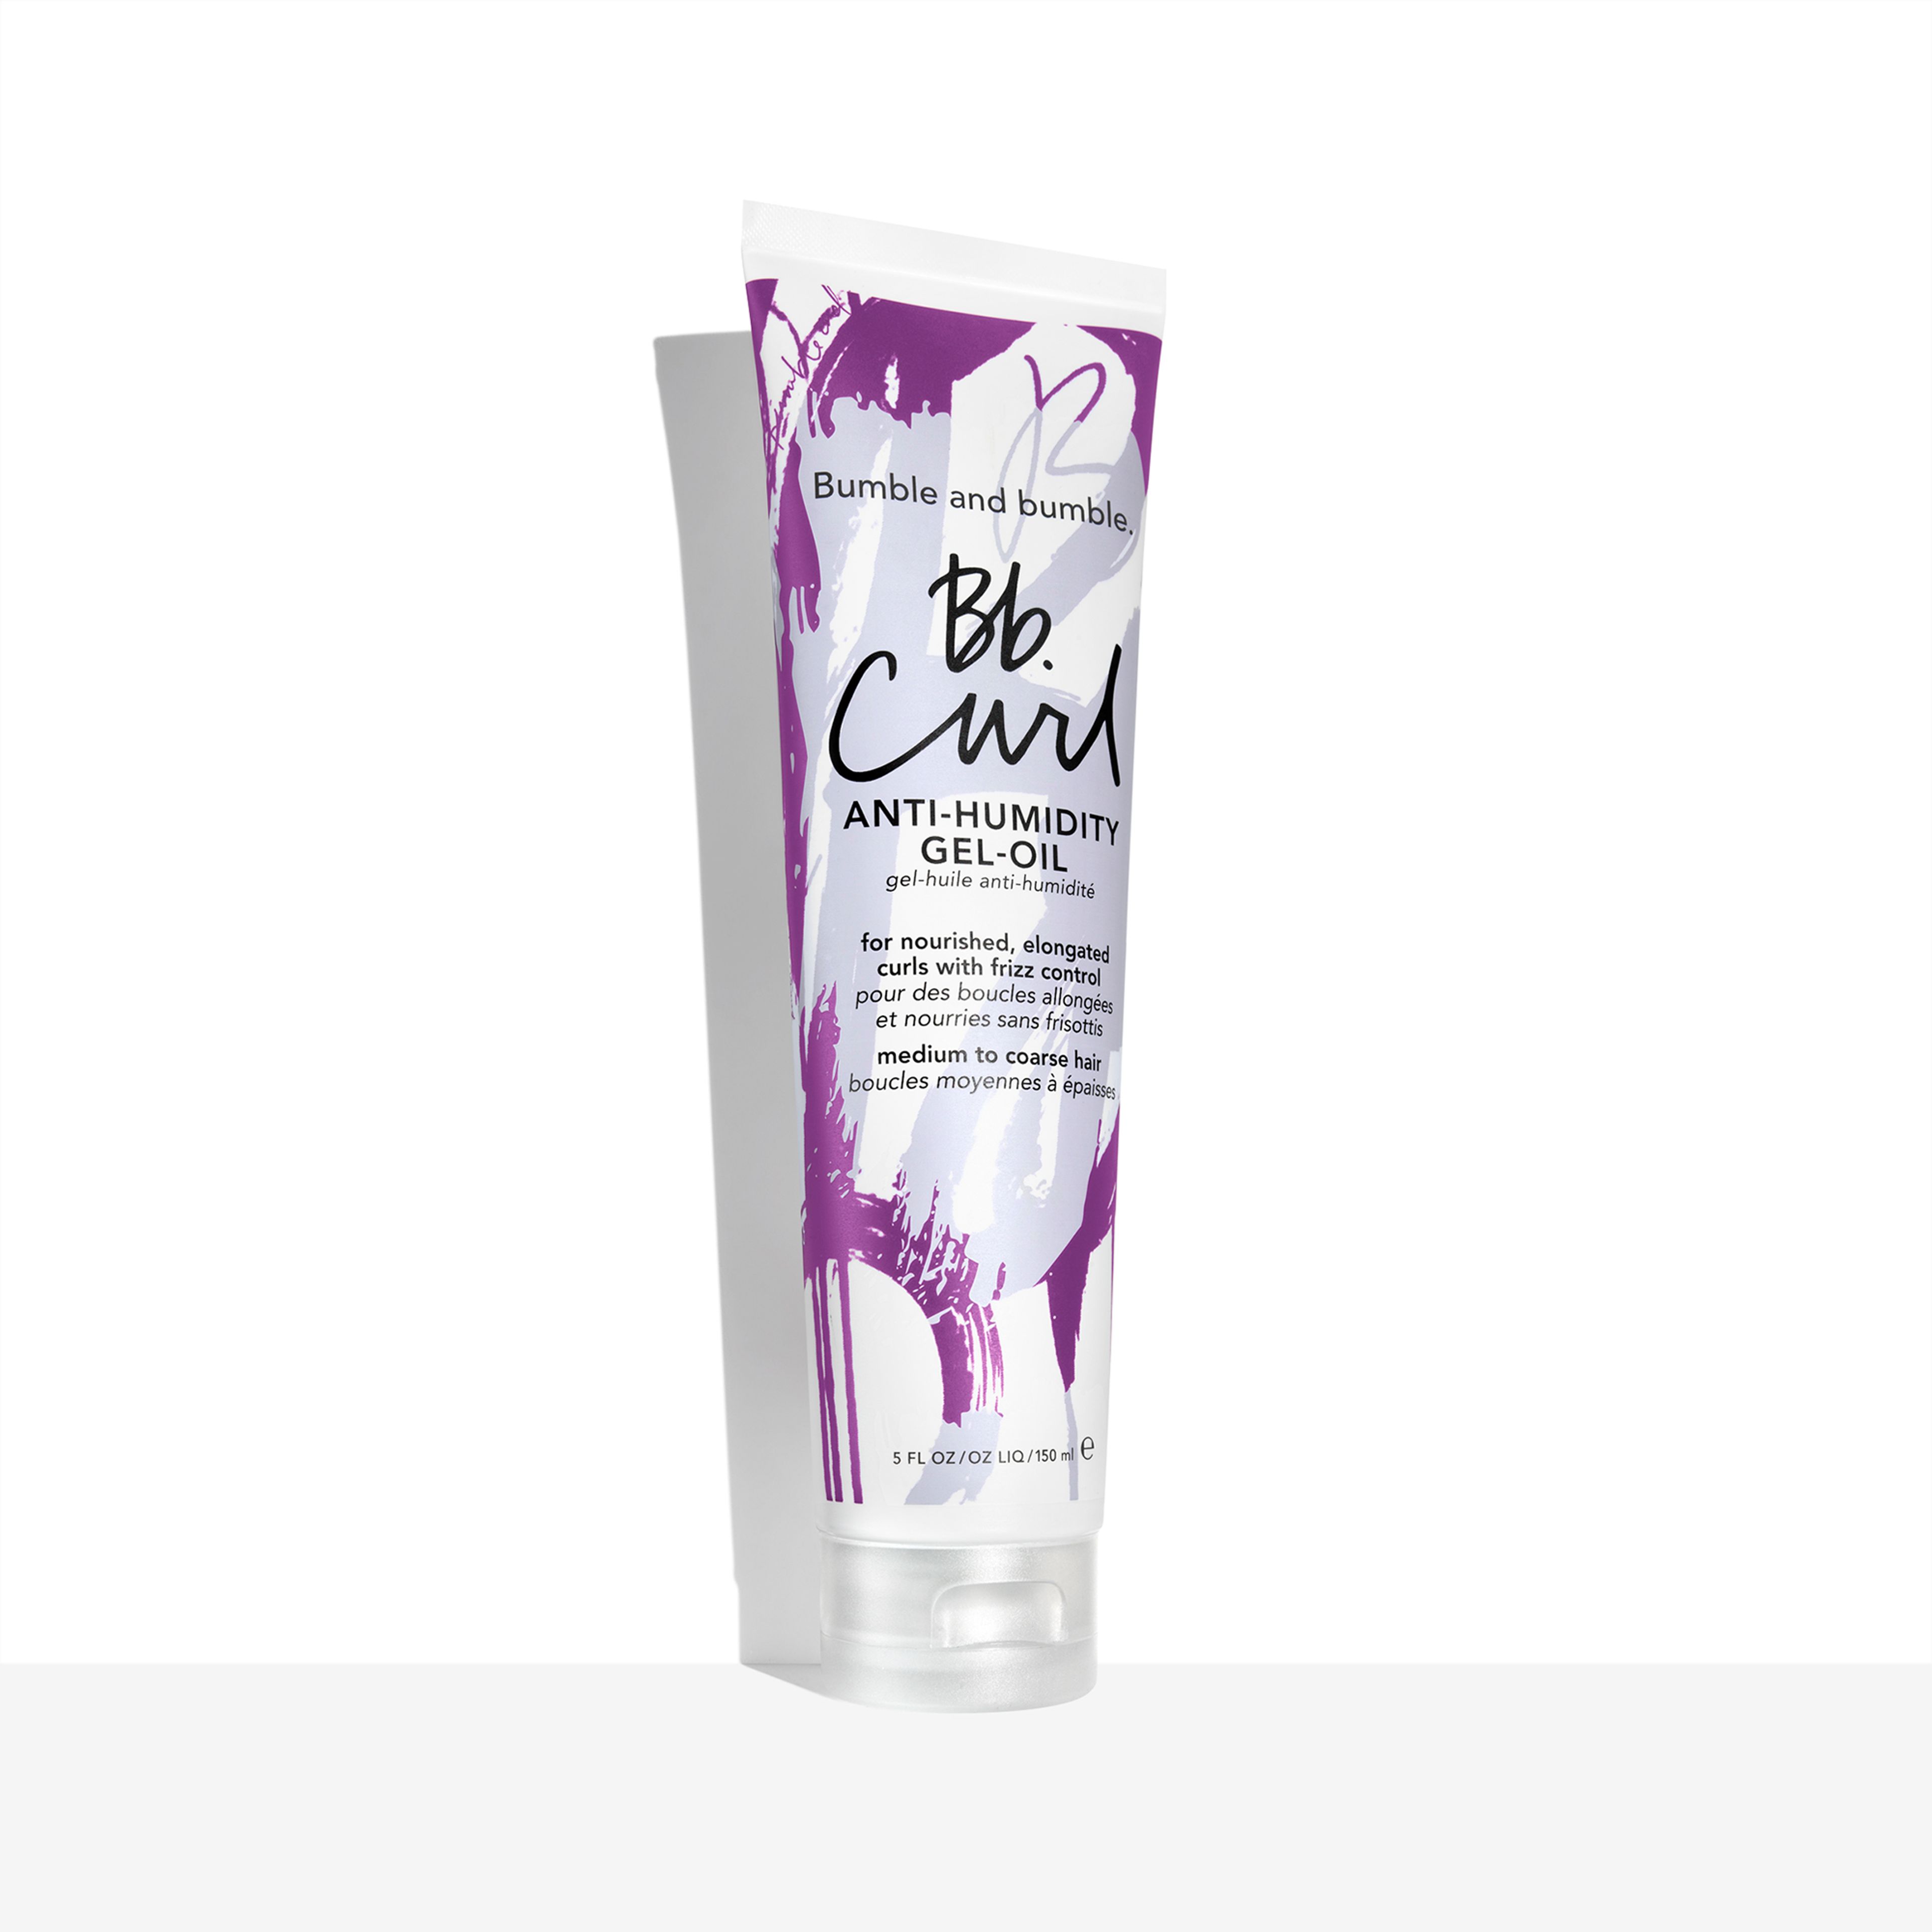 Bumble and bumble Curl Gel-oil 1